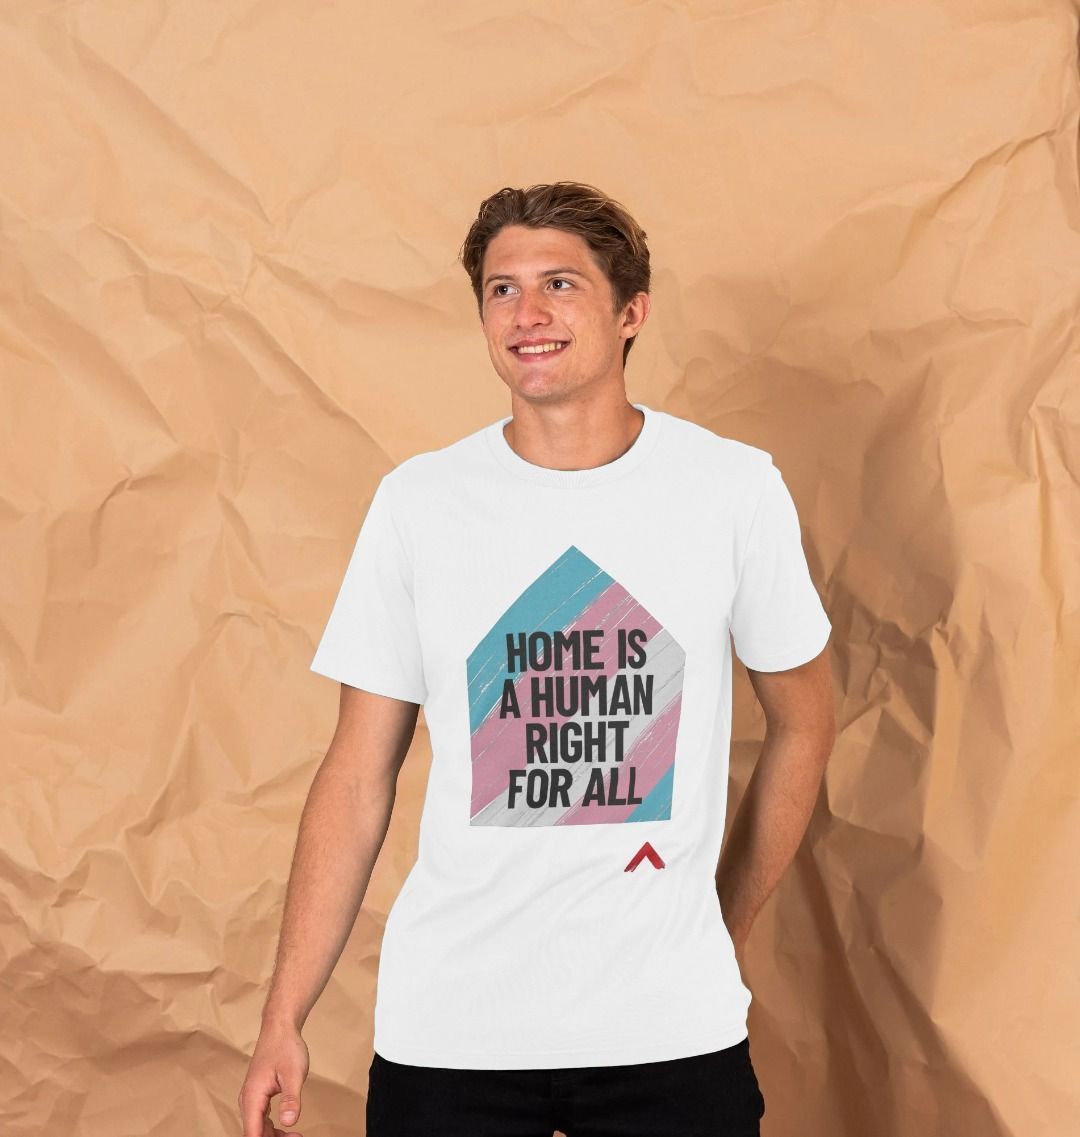 Home is a Human Right for All white T-shirt, t-shirt design is a house shape filled with trans flag colours with black bold slogan "Home is human right for all"